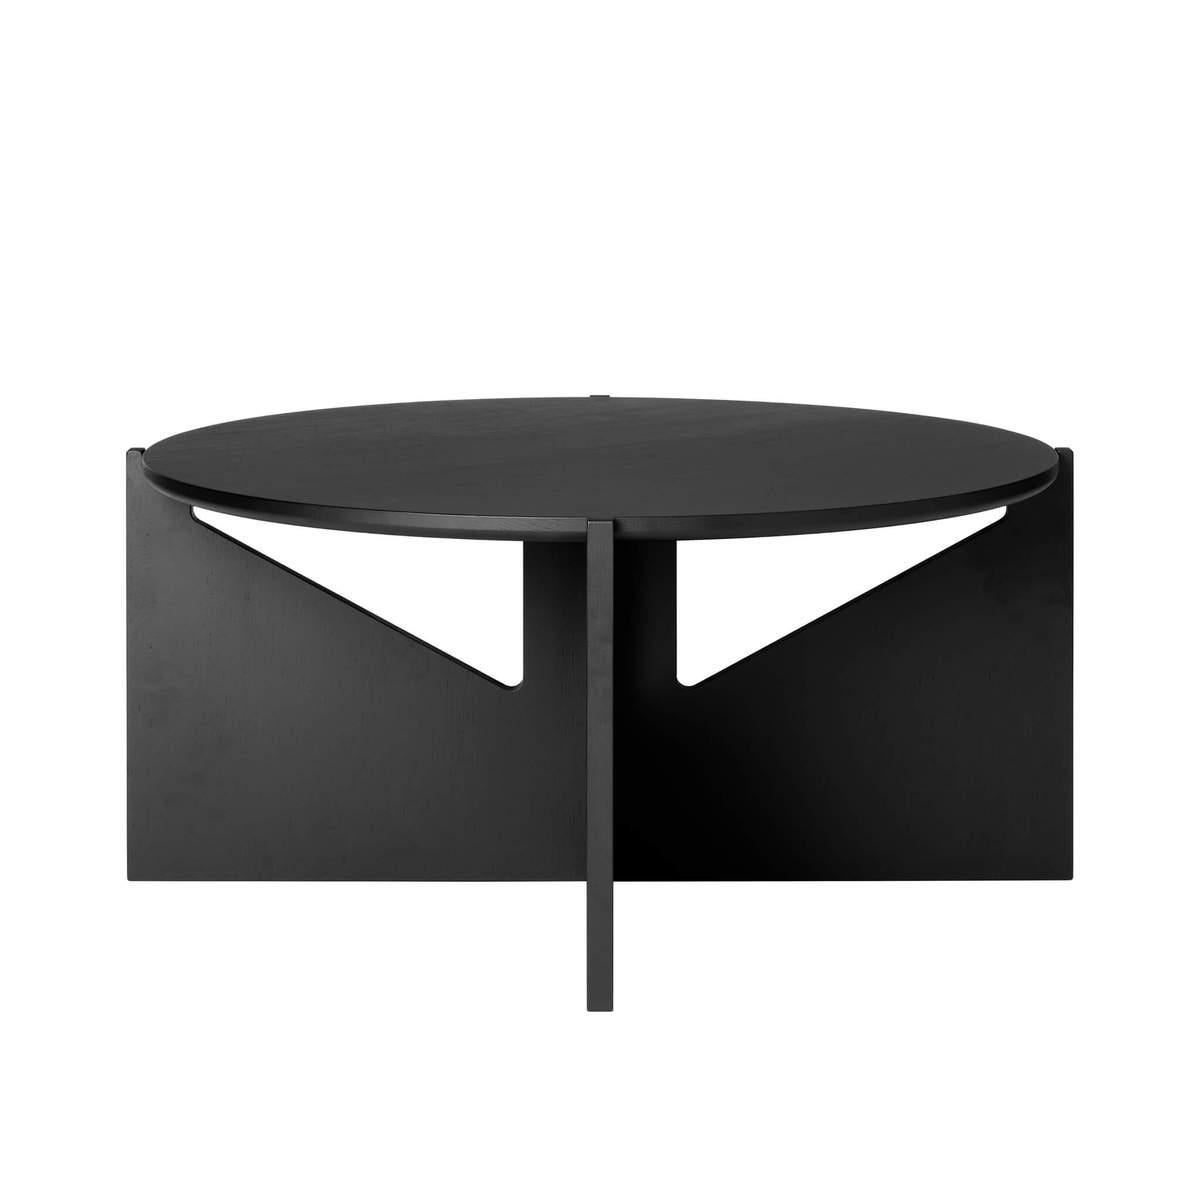 XL black table by Kristina Dam Studio
Materials: Solid oak with black lacquer. 
Also available in other colors and sizes. Please contact us for more information.  
Dimensions: 78 x 78 x H 36cm.

XL black table is a big coffee table based on the